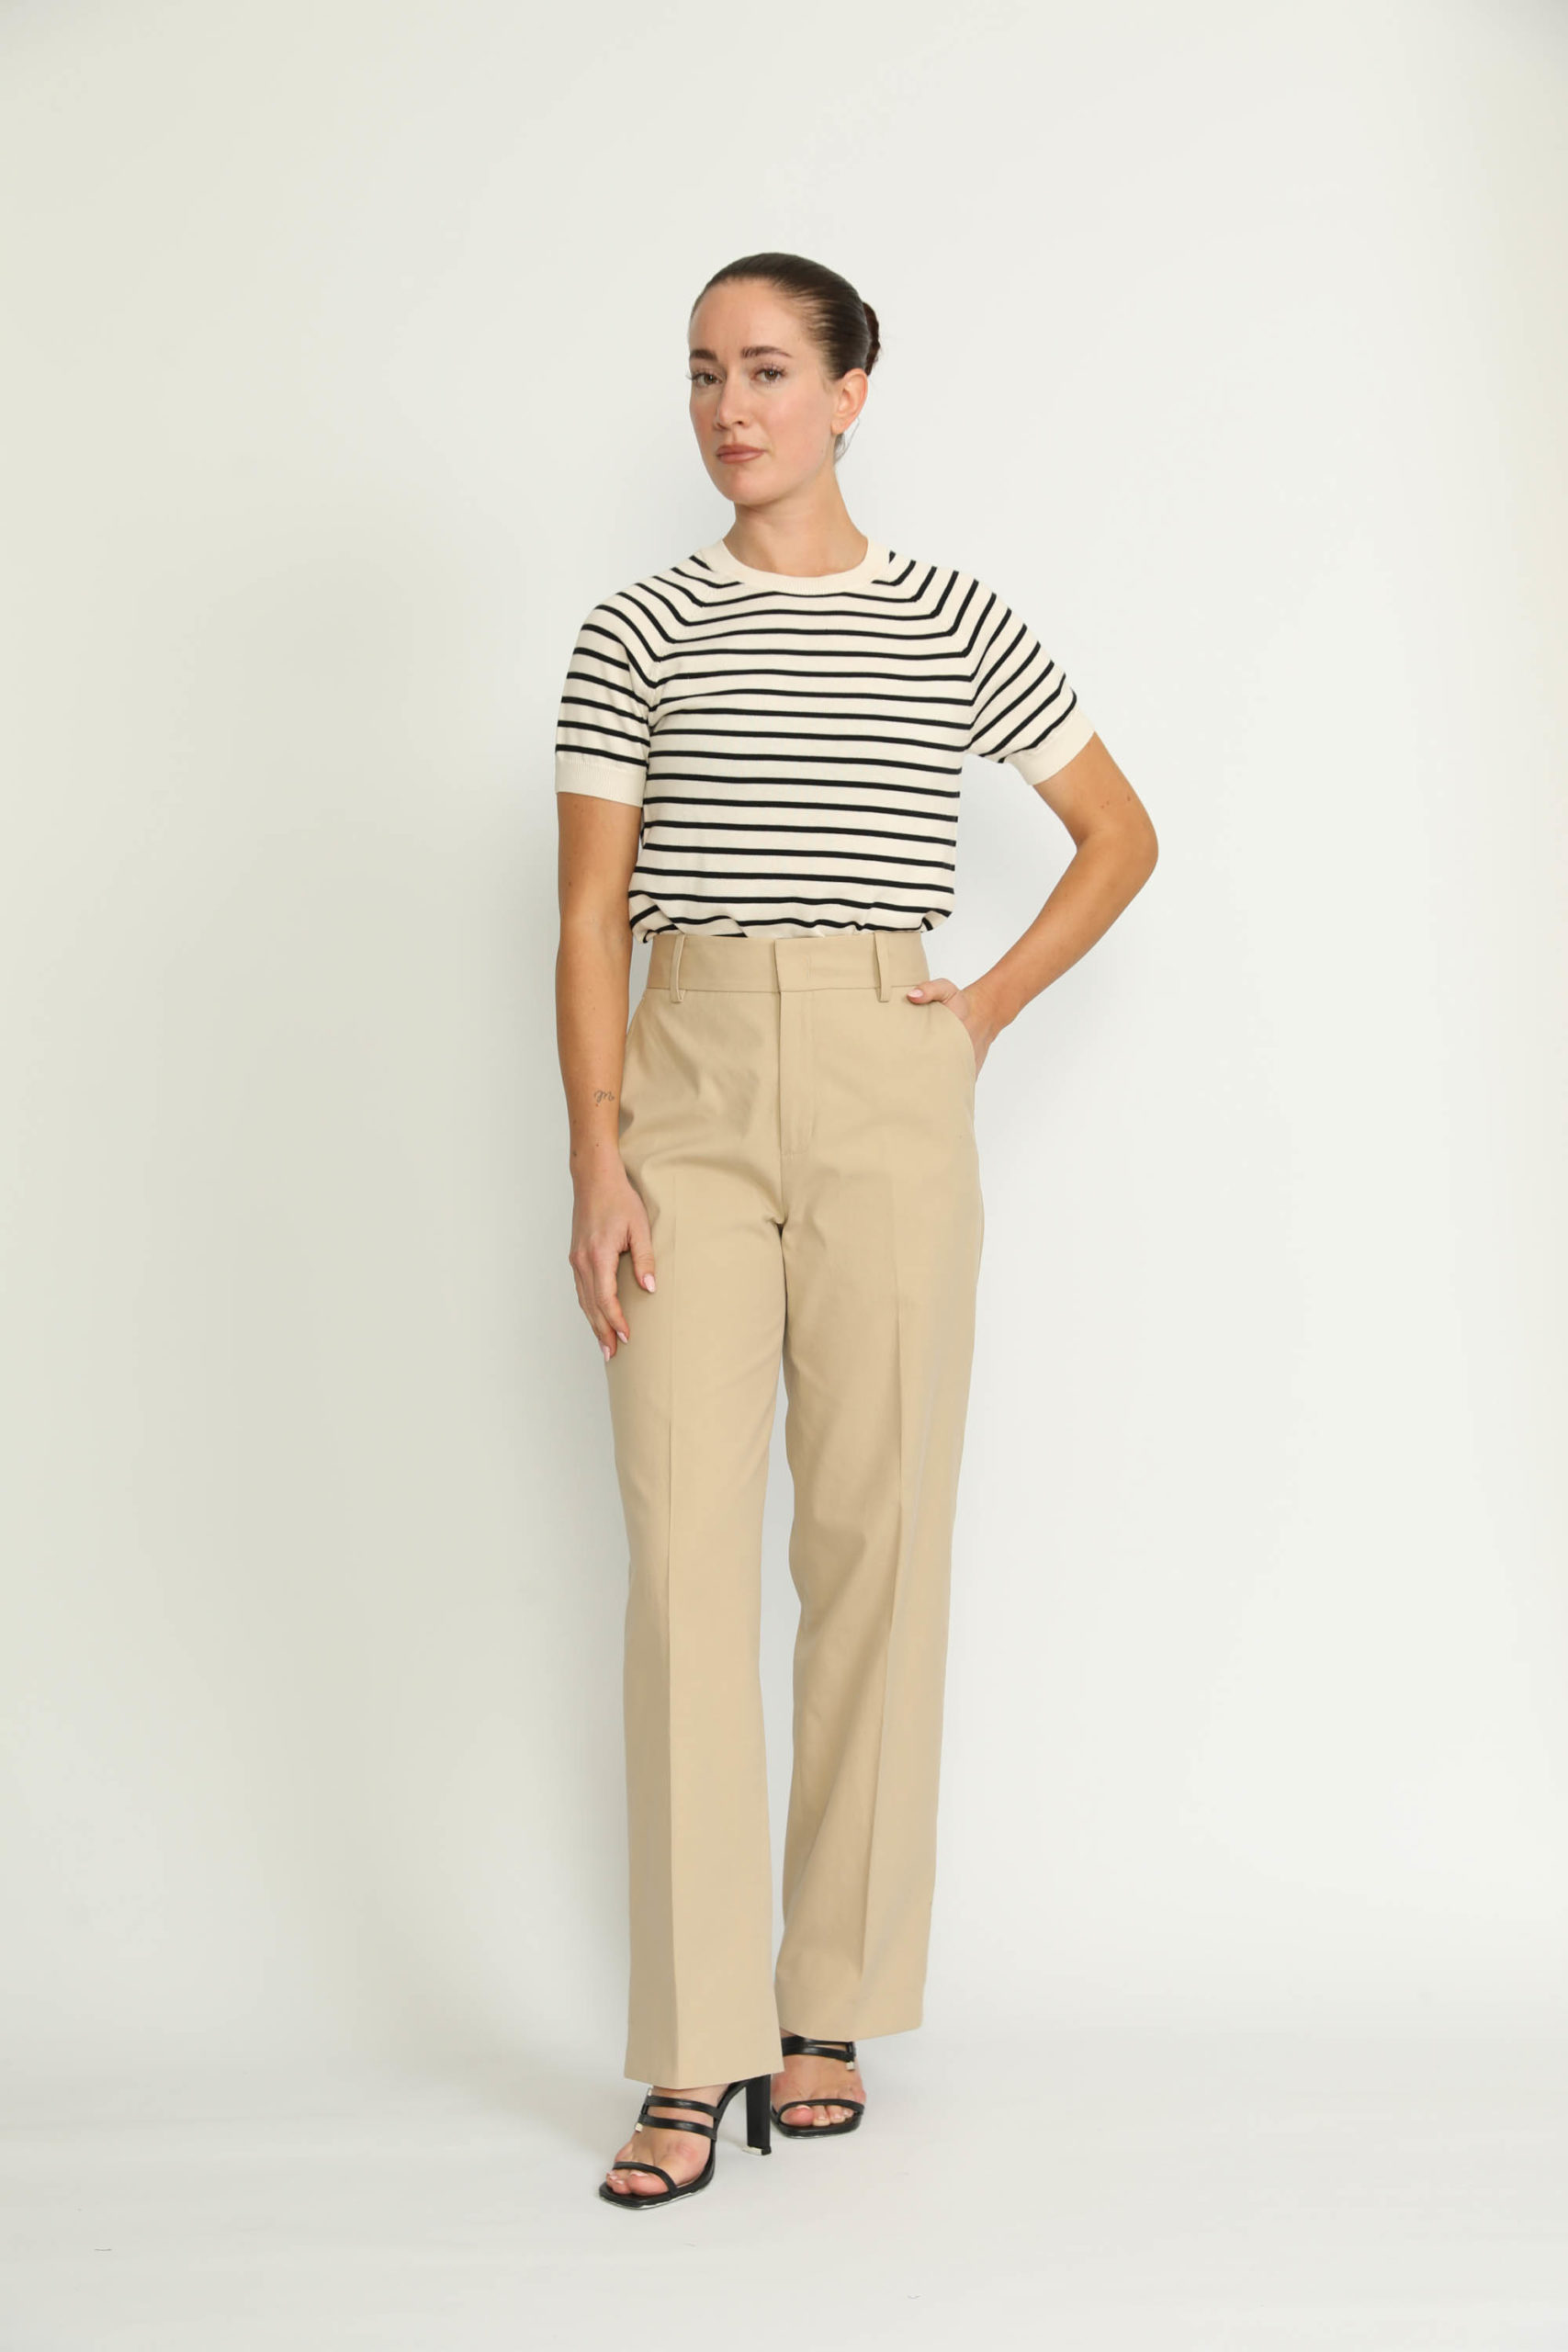 Manchester Trousers – Manchester High-Waisted Khaki Beige Twill Trousers0